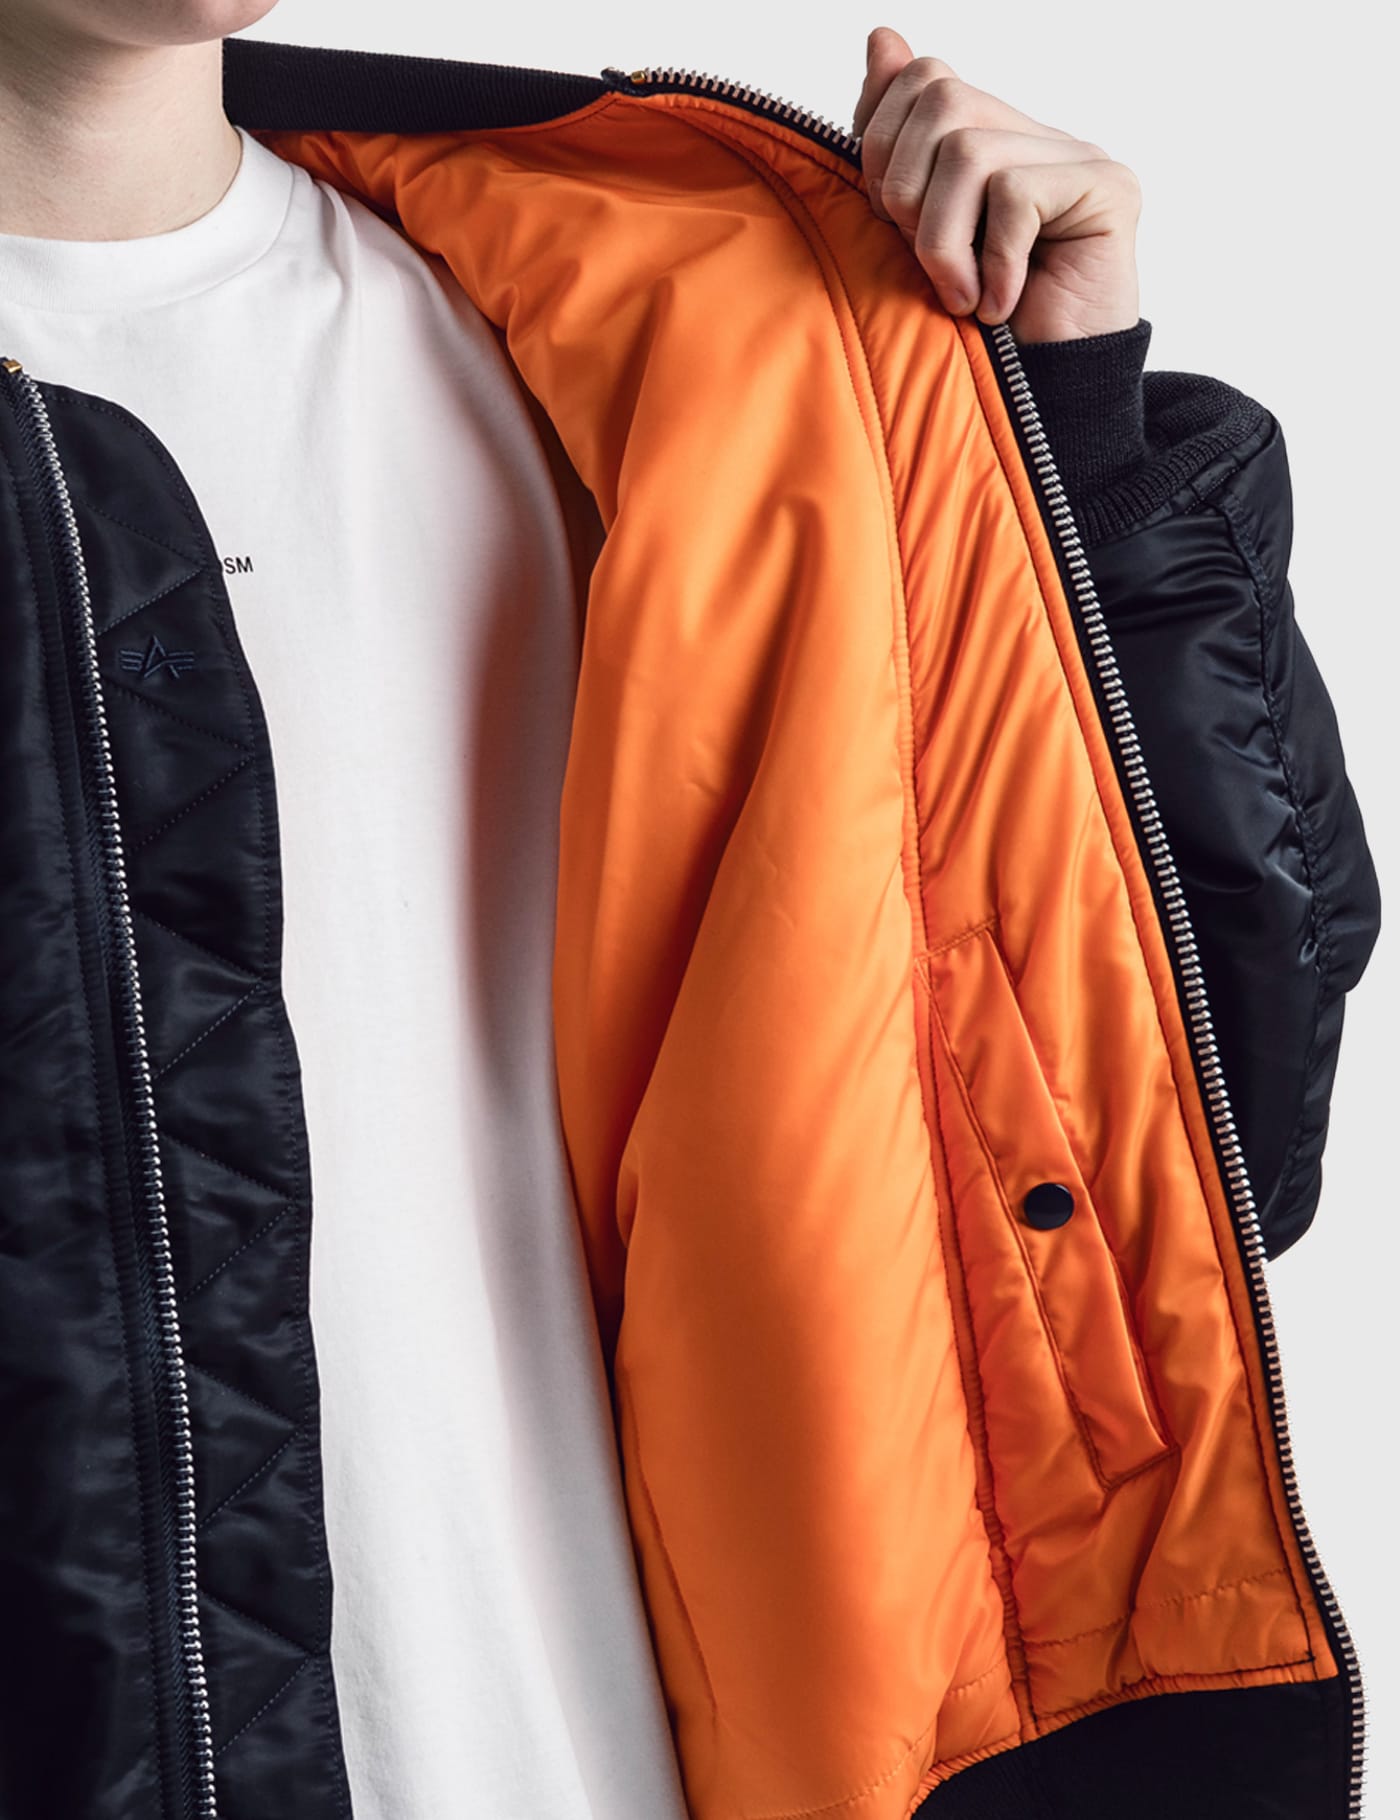 Undercover - Undercover x Alpha Industries Coat | HBX - Globally 